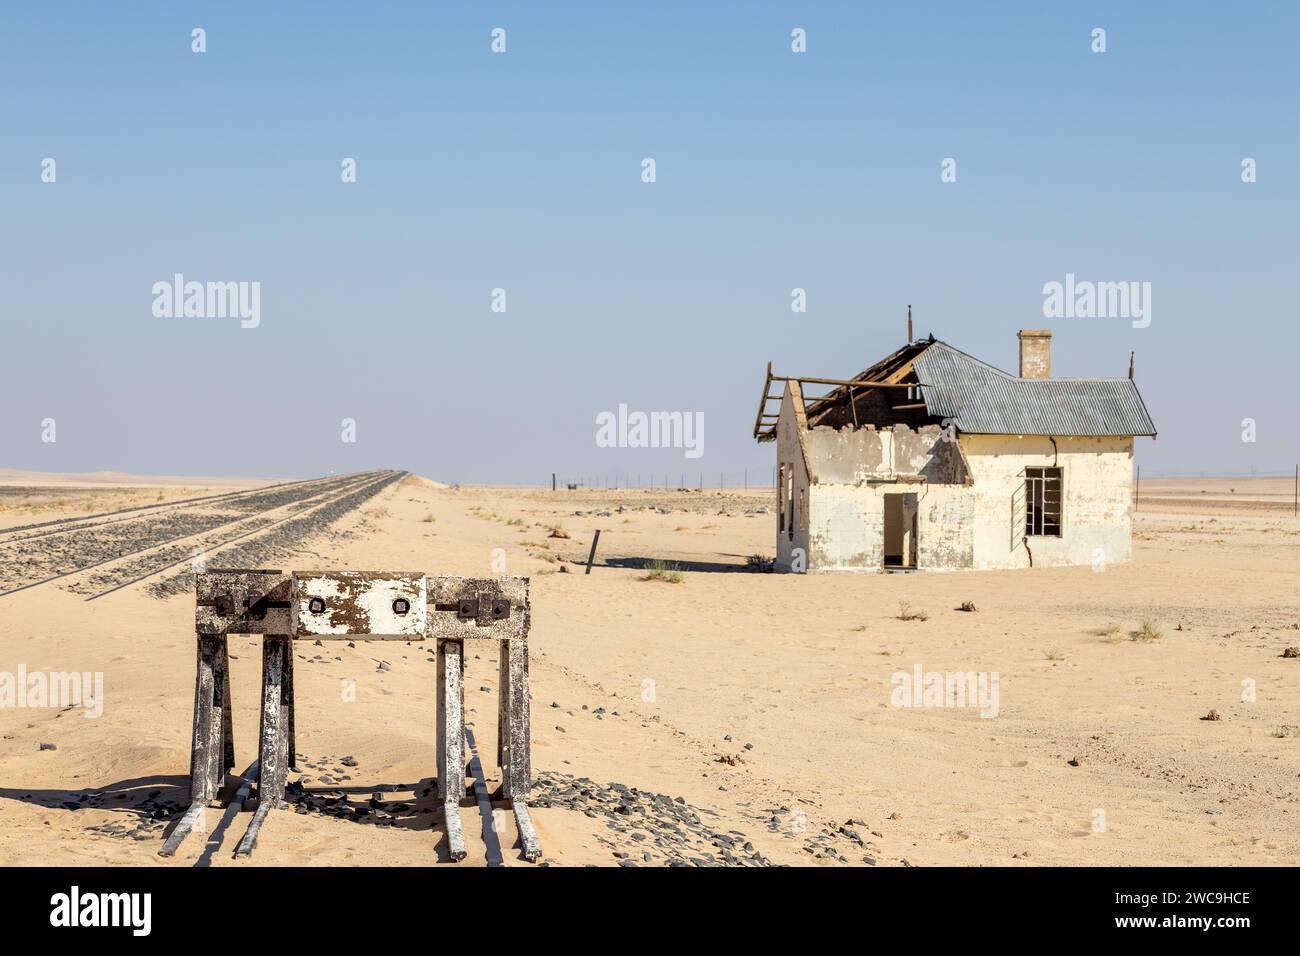 An old structure stands desolately in the arid desert, surrounded by vast stretches of barren land Stock Photo